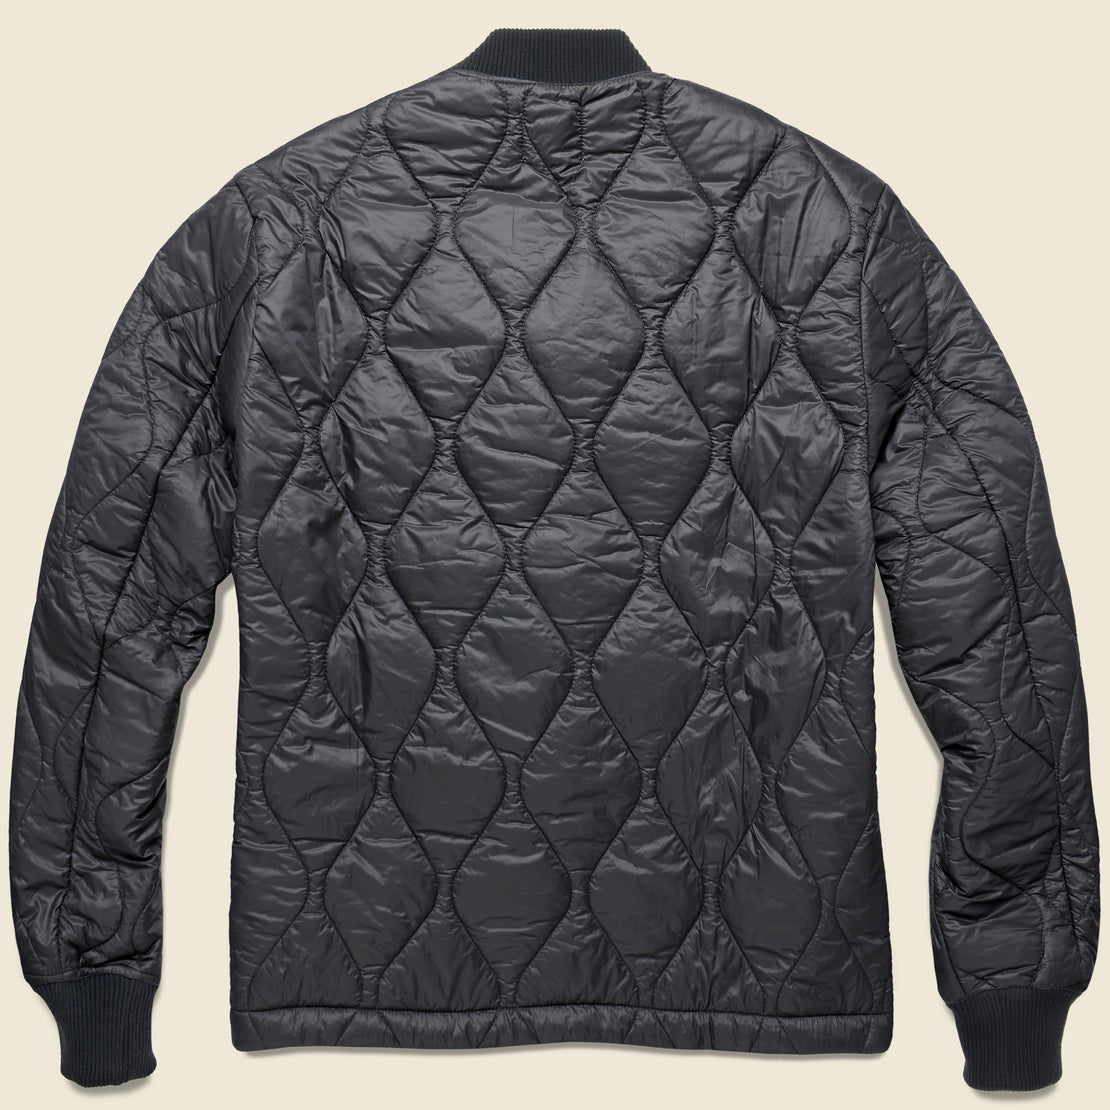 Quilted Nylon Bomber - Black - Save Khaki - STAG Provisions - Outerwear - Coat / Jacket